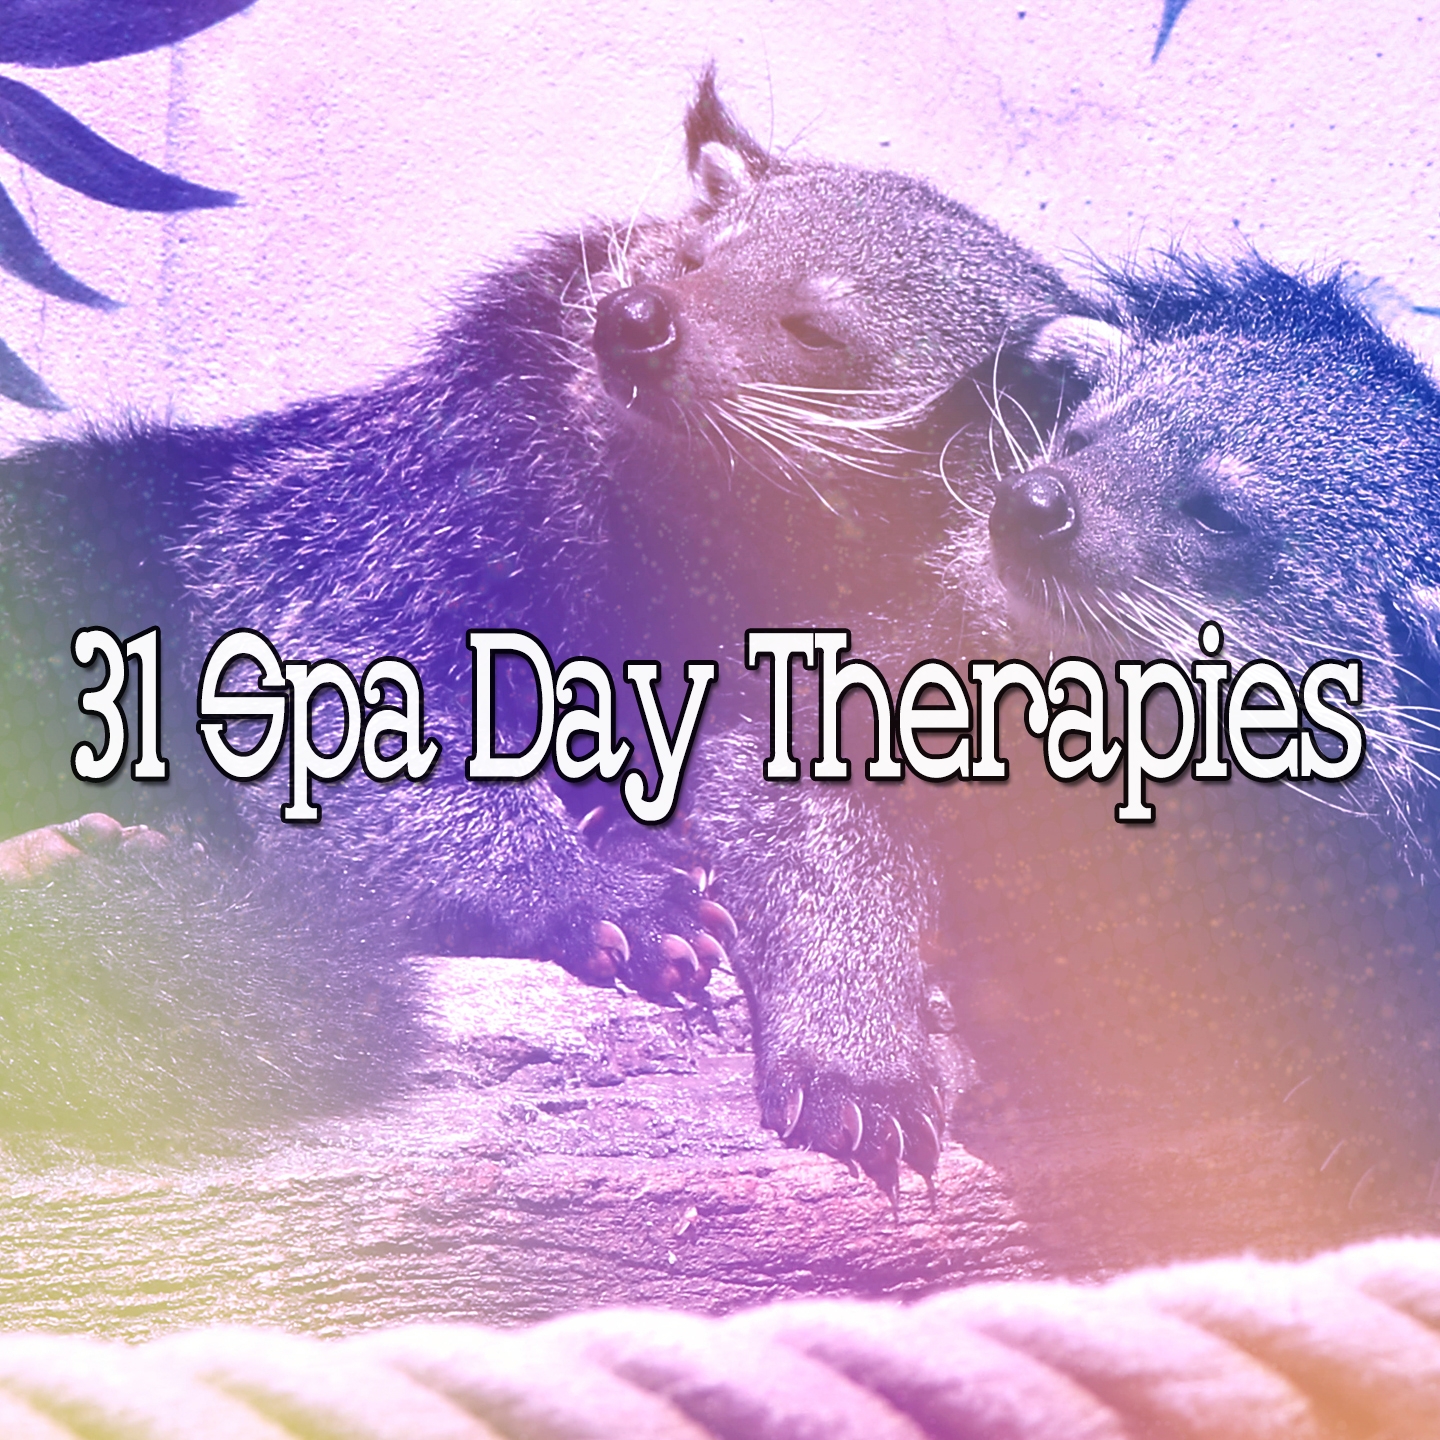 31 Spa Day Therapies